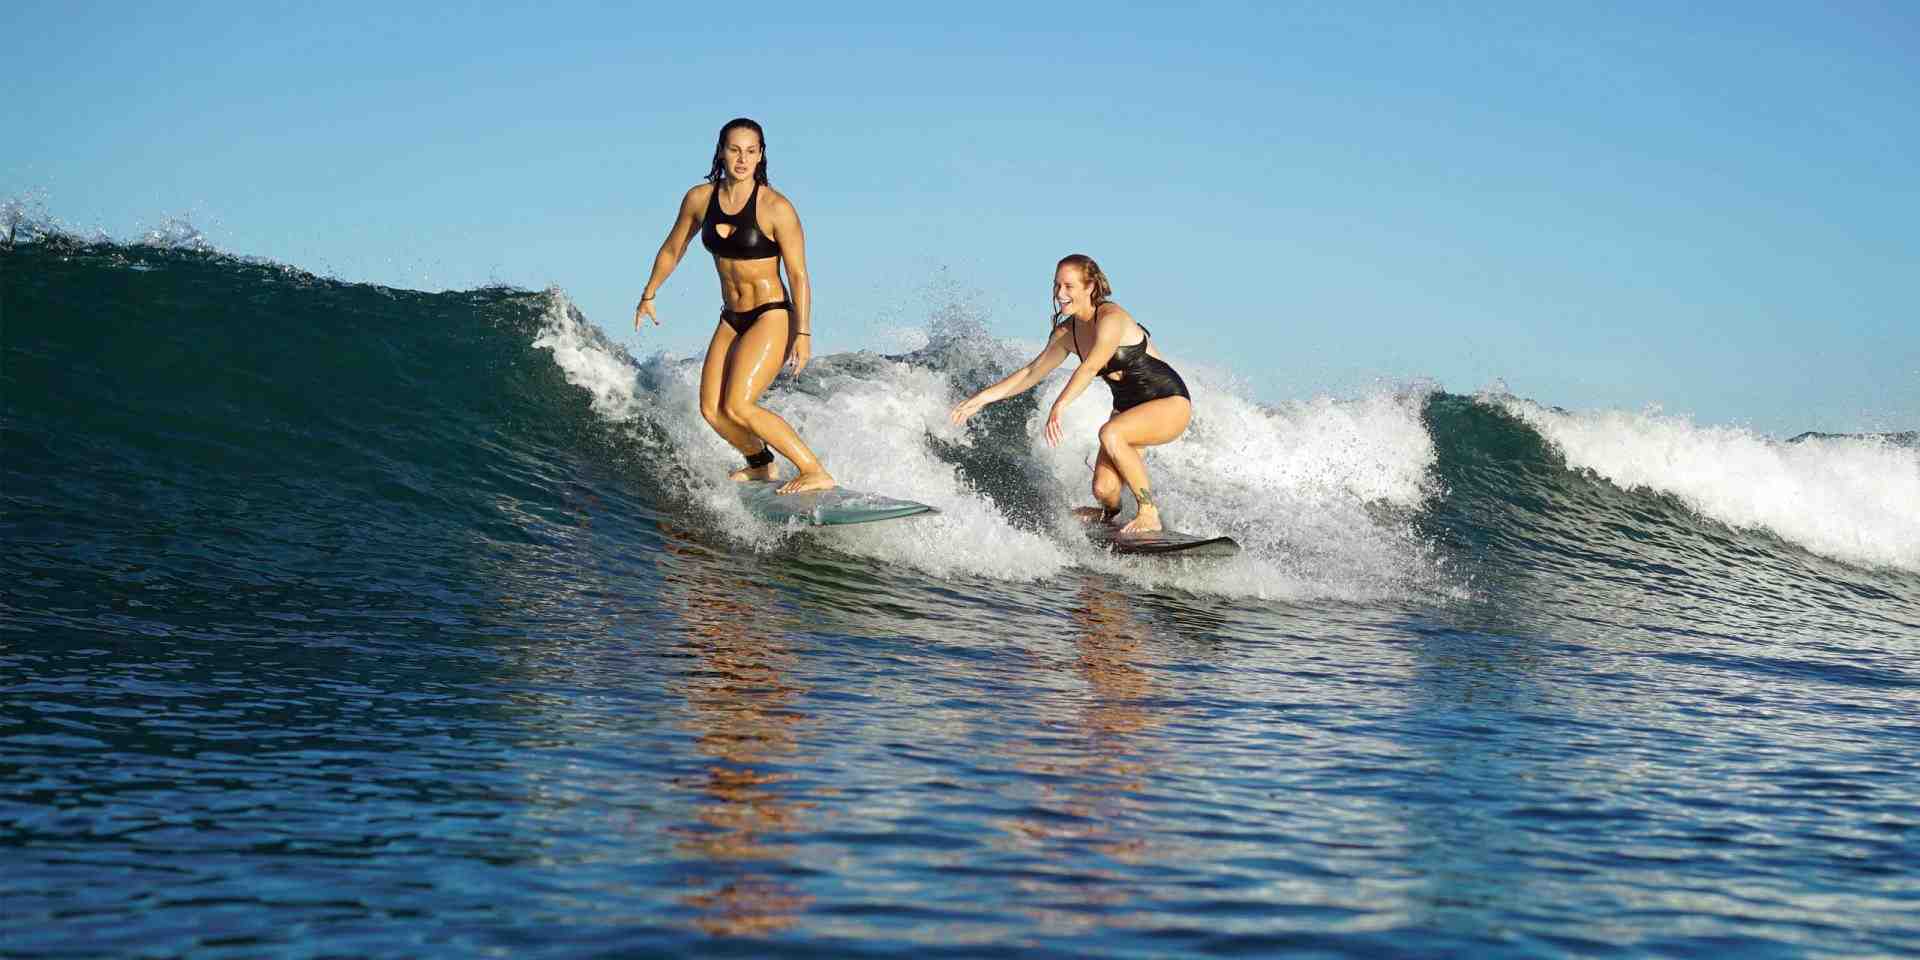 Can fat people surf?